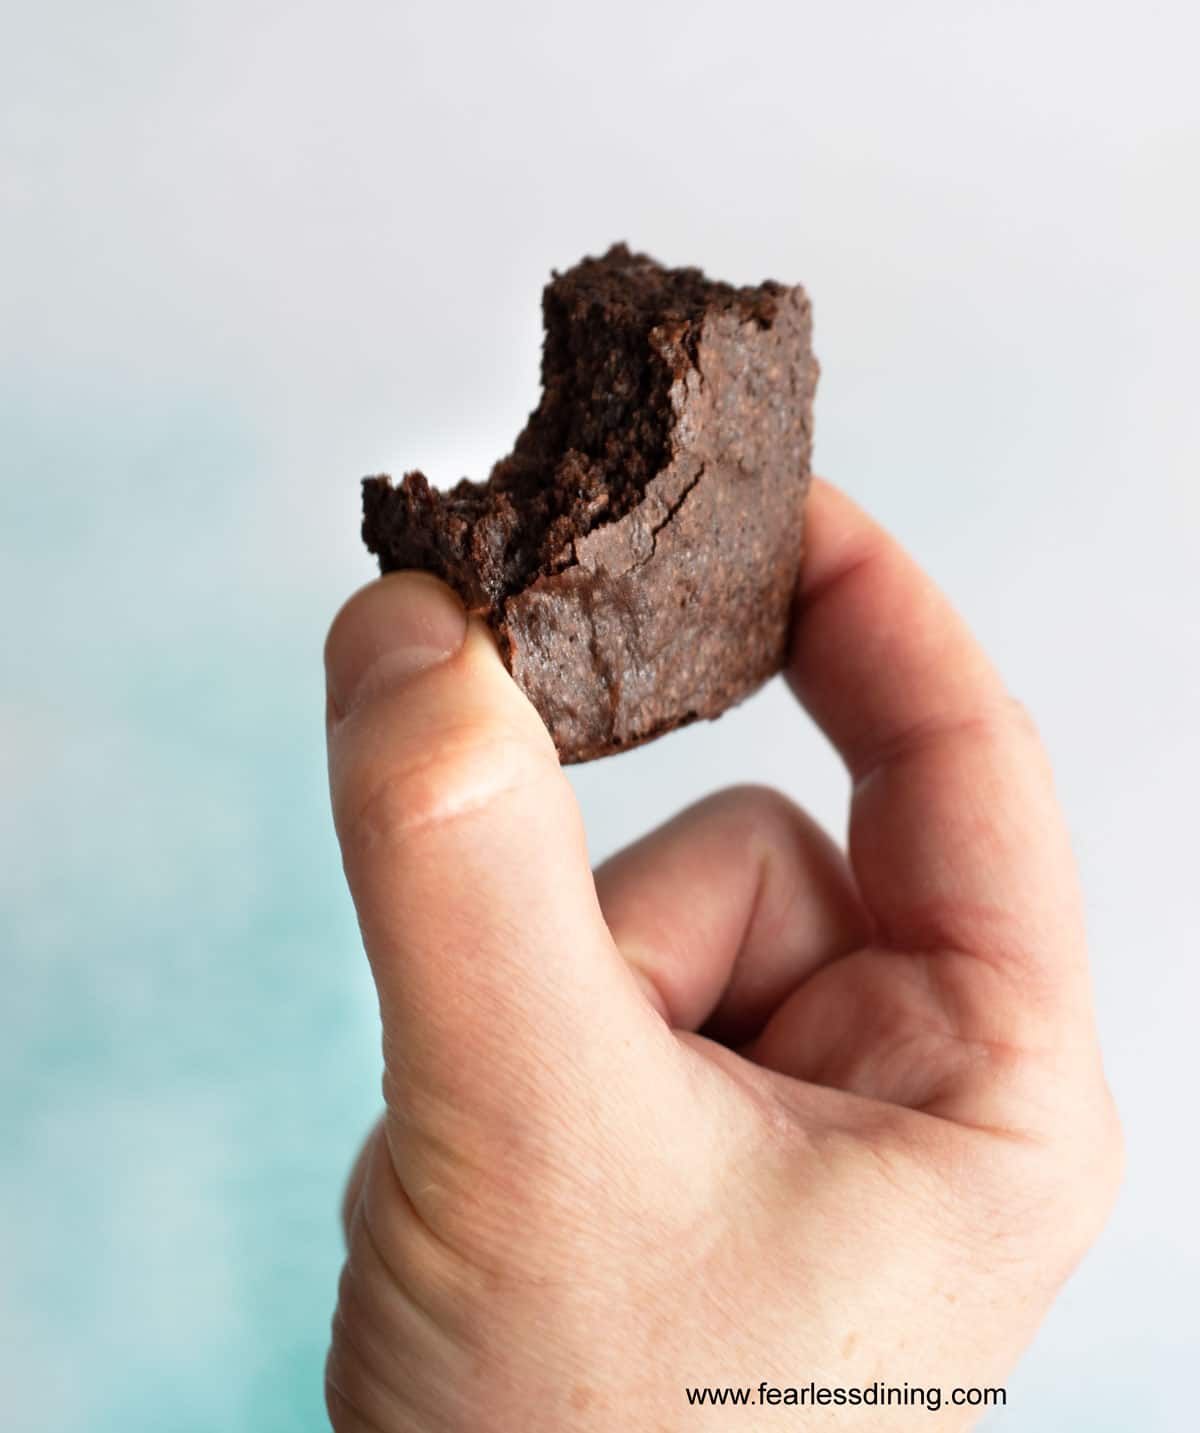 A hand holding up a brownie with a bite taken out.